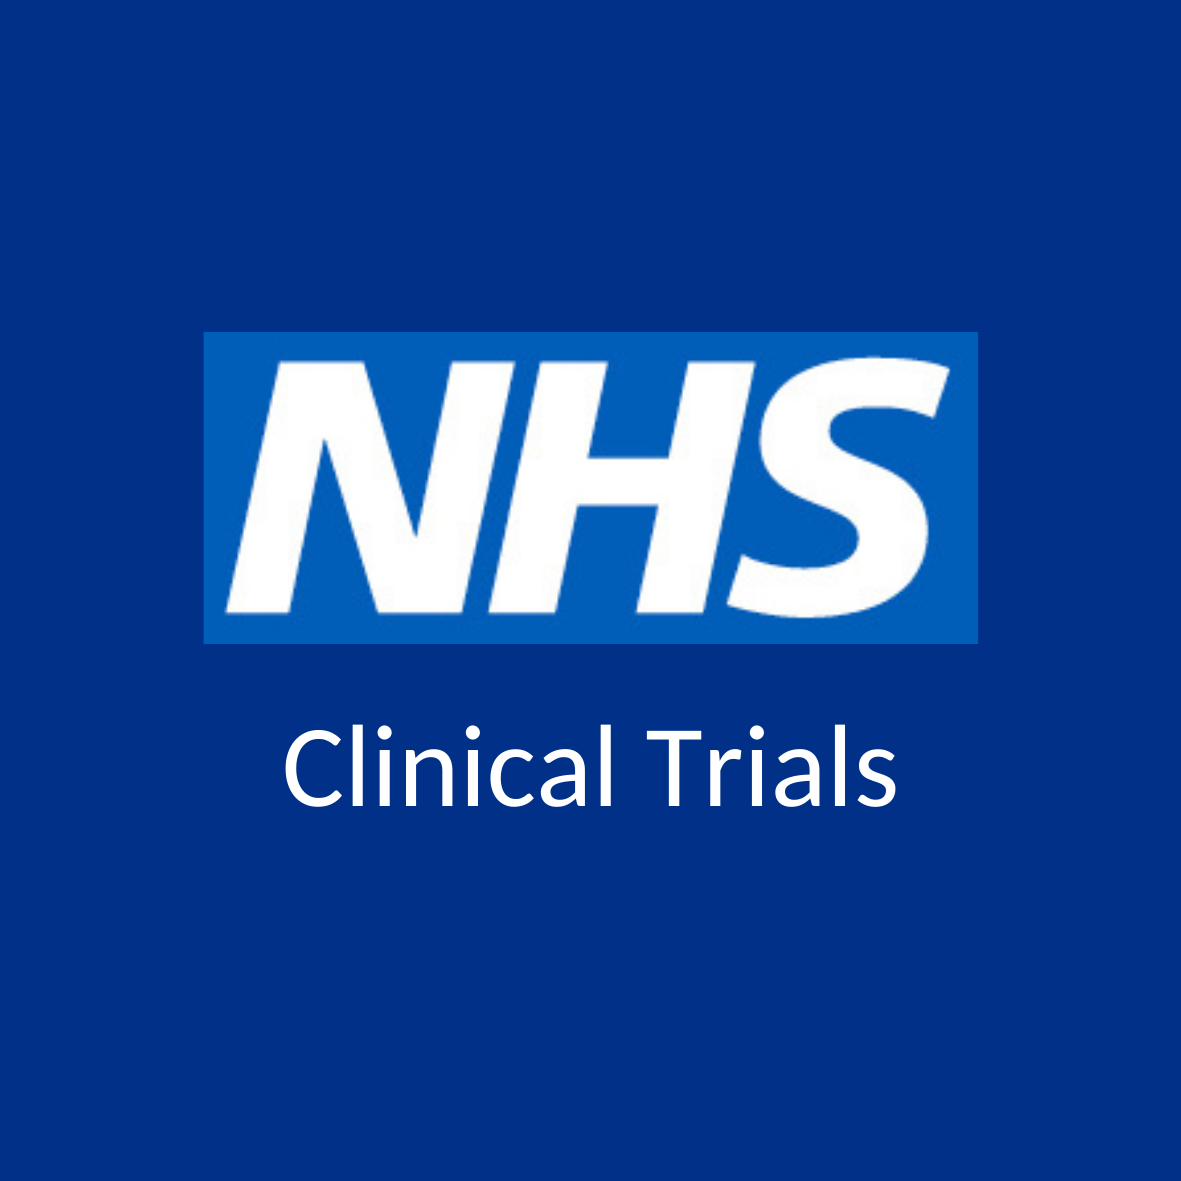 NHS Logo With Words Clinical Trials